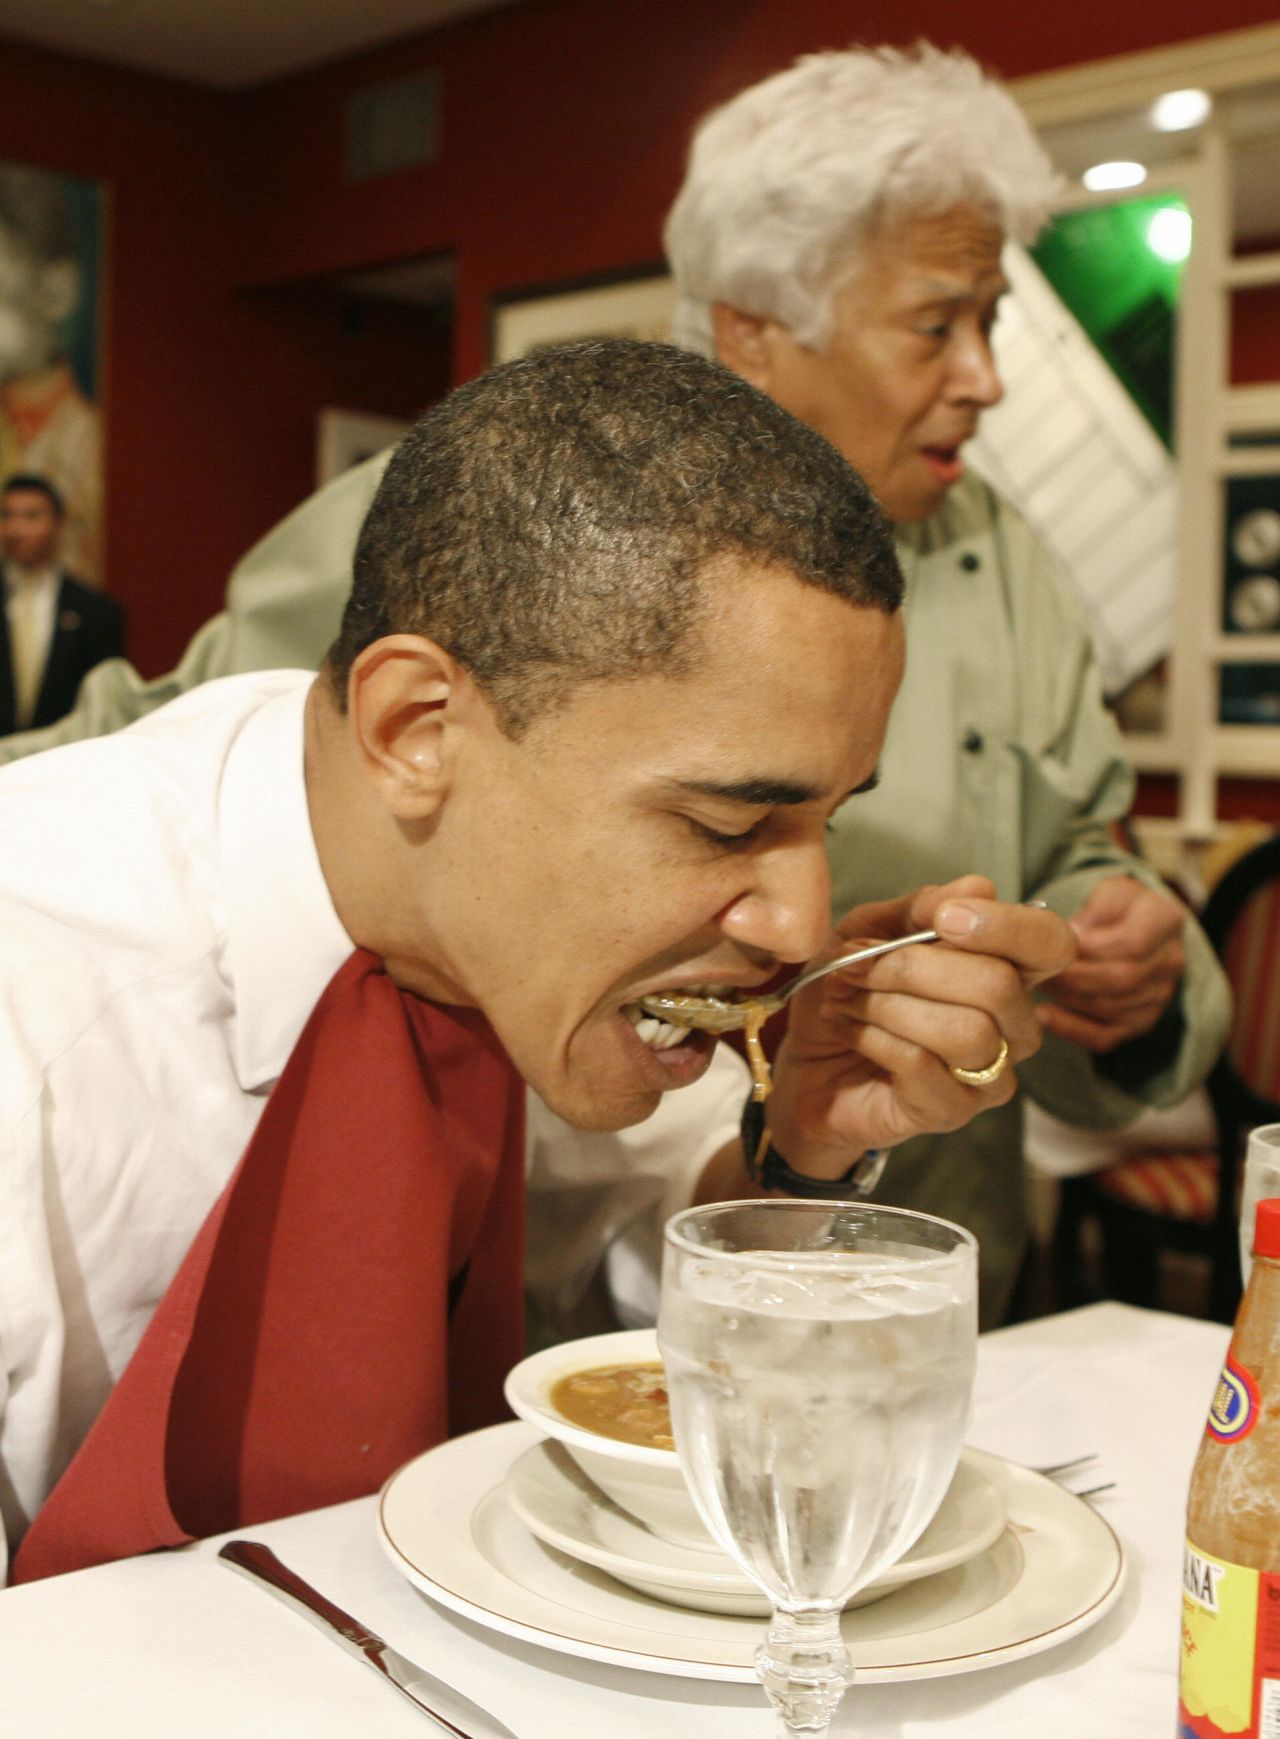 As far as we know, Obama didn't get into the tomato-no-tomato debate while enjoying the gumbo at Dooky Chase Restaurant in New Orleans.